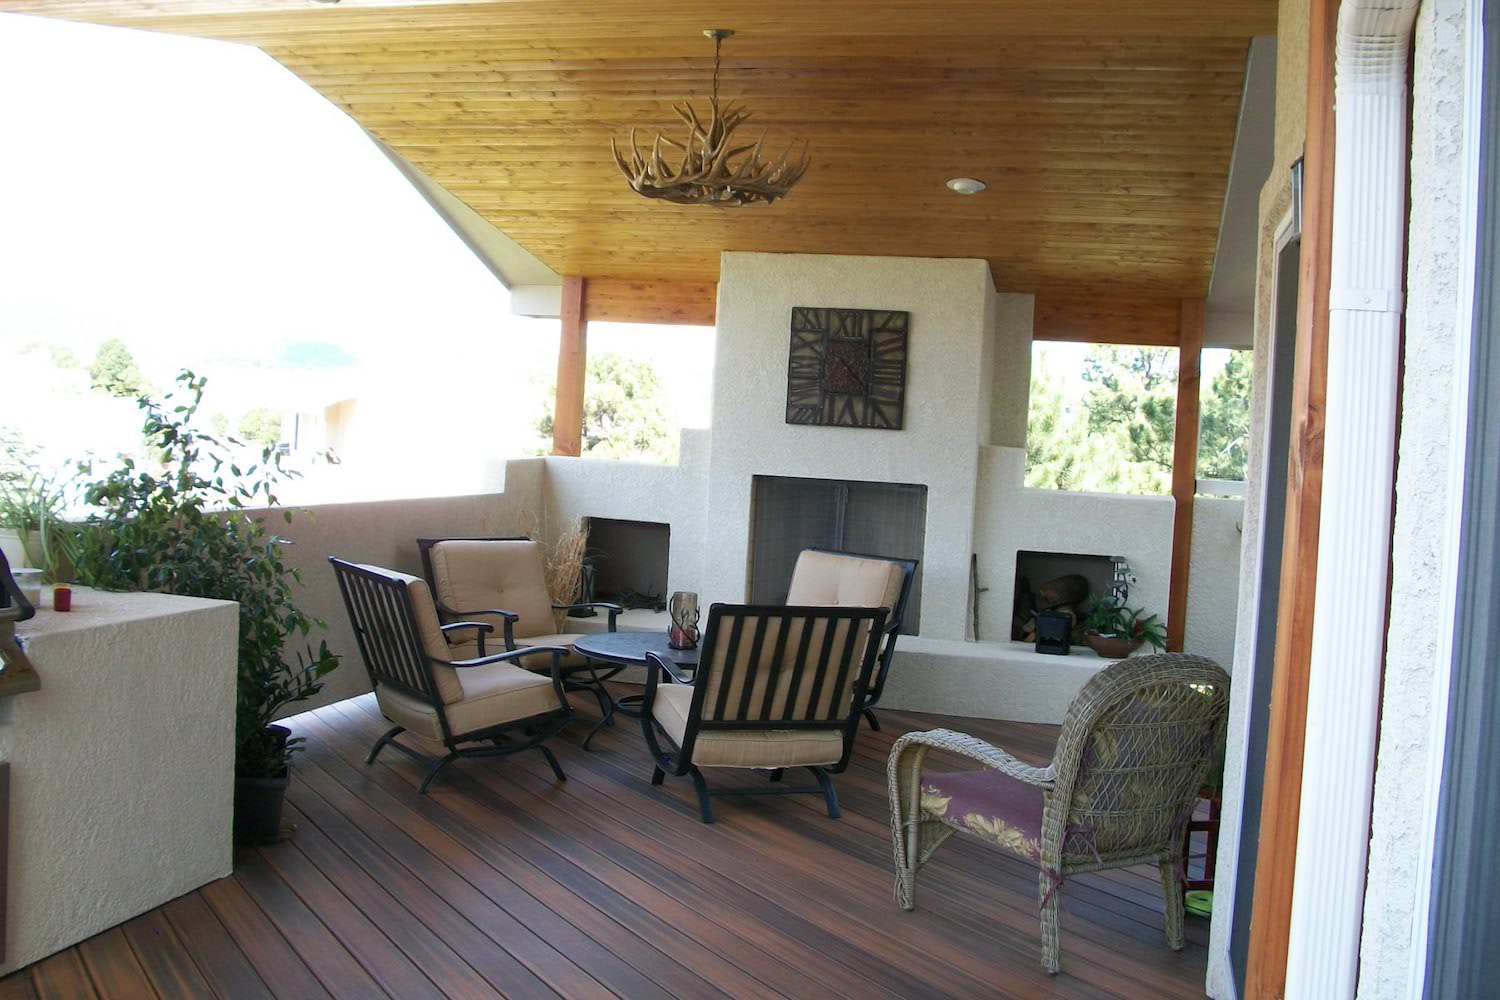 Gorgeous composite deck with vaulted cover, stucco half-walls and stucco wood-burning fireplace.